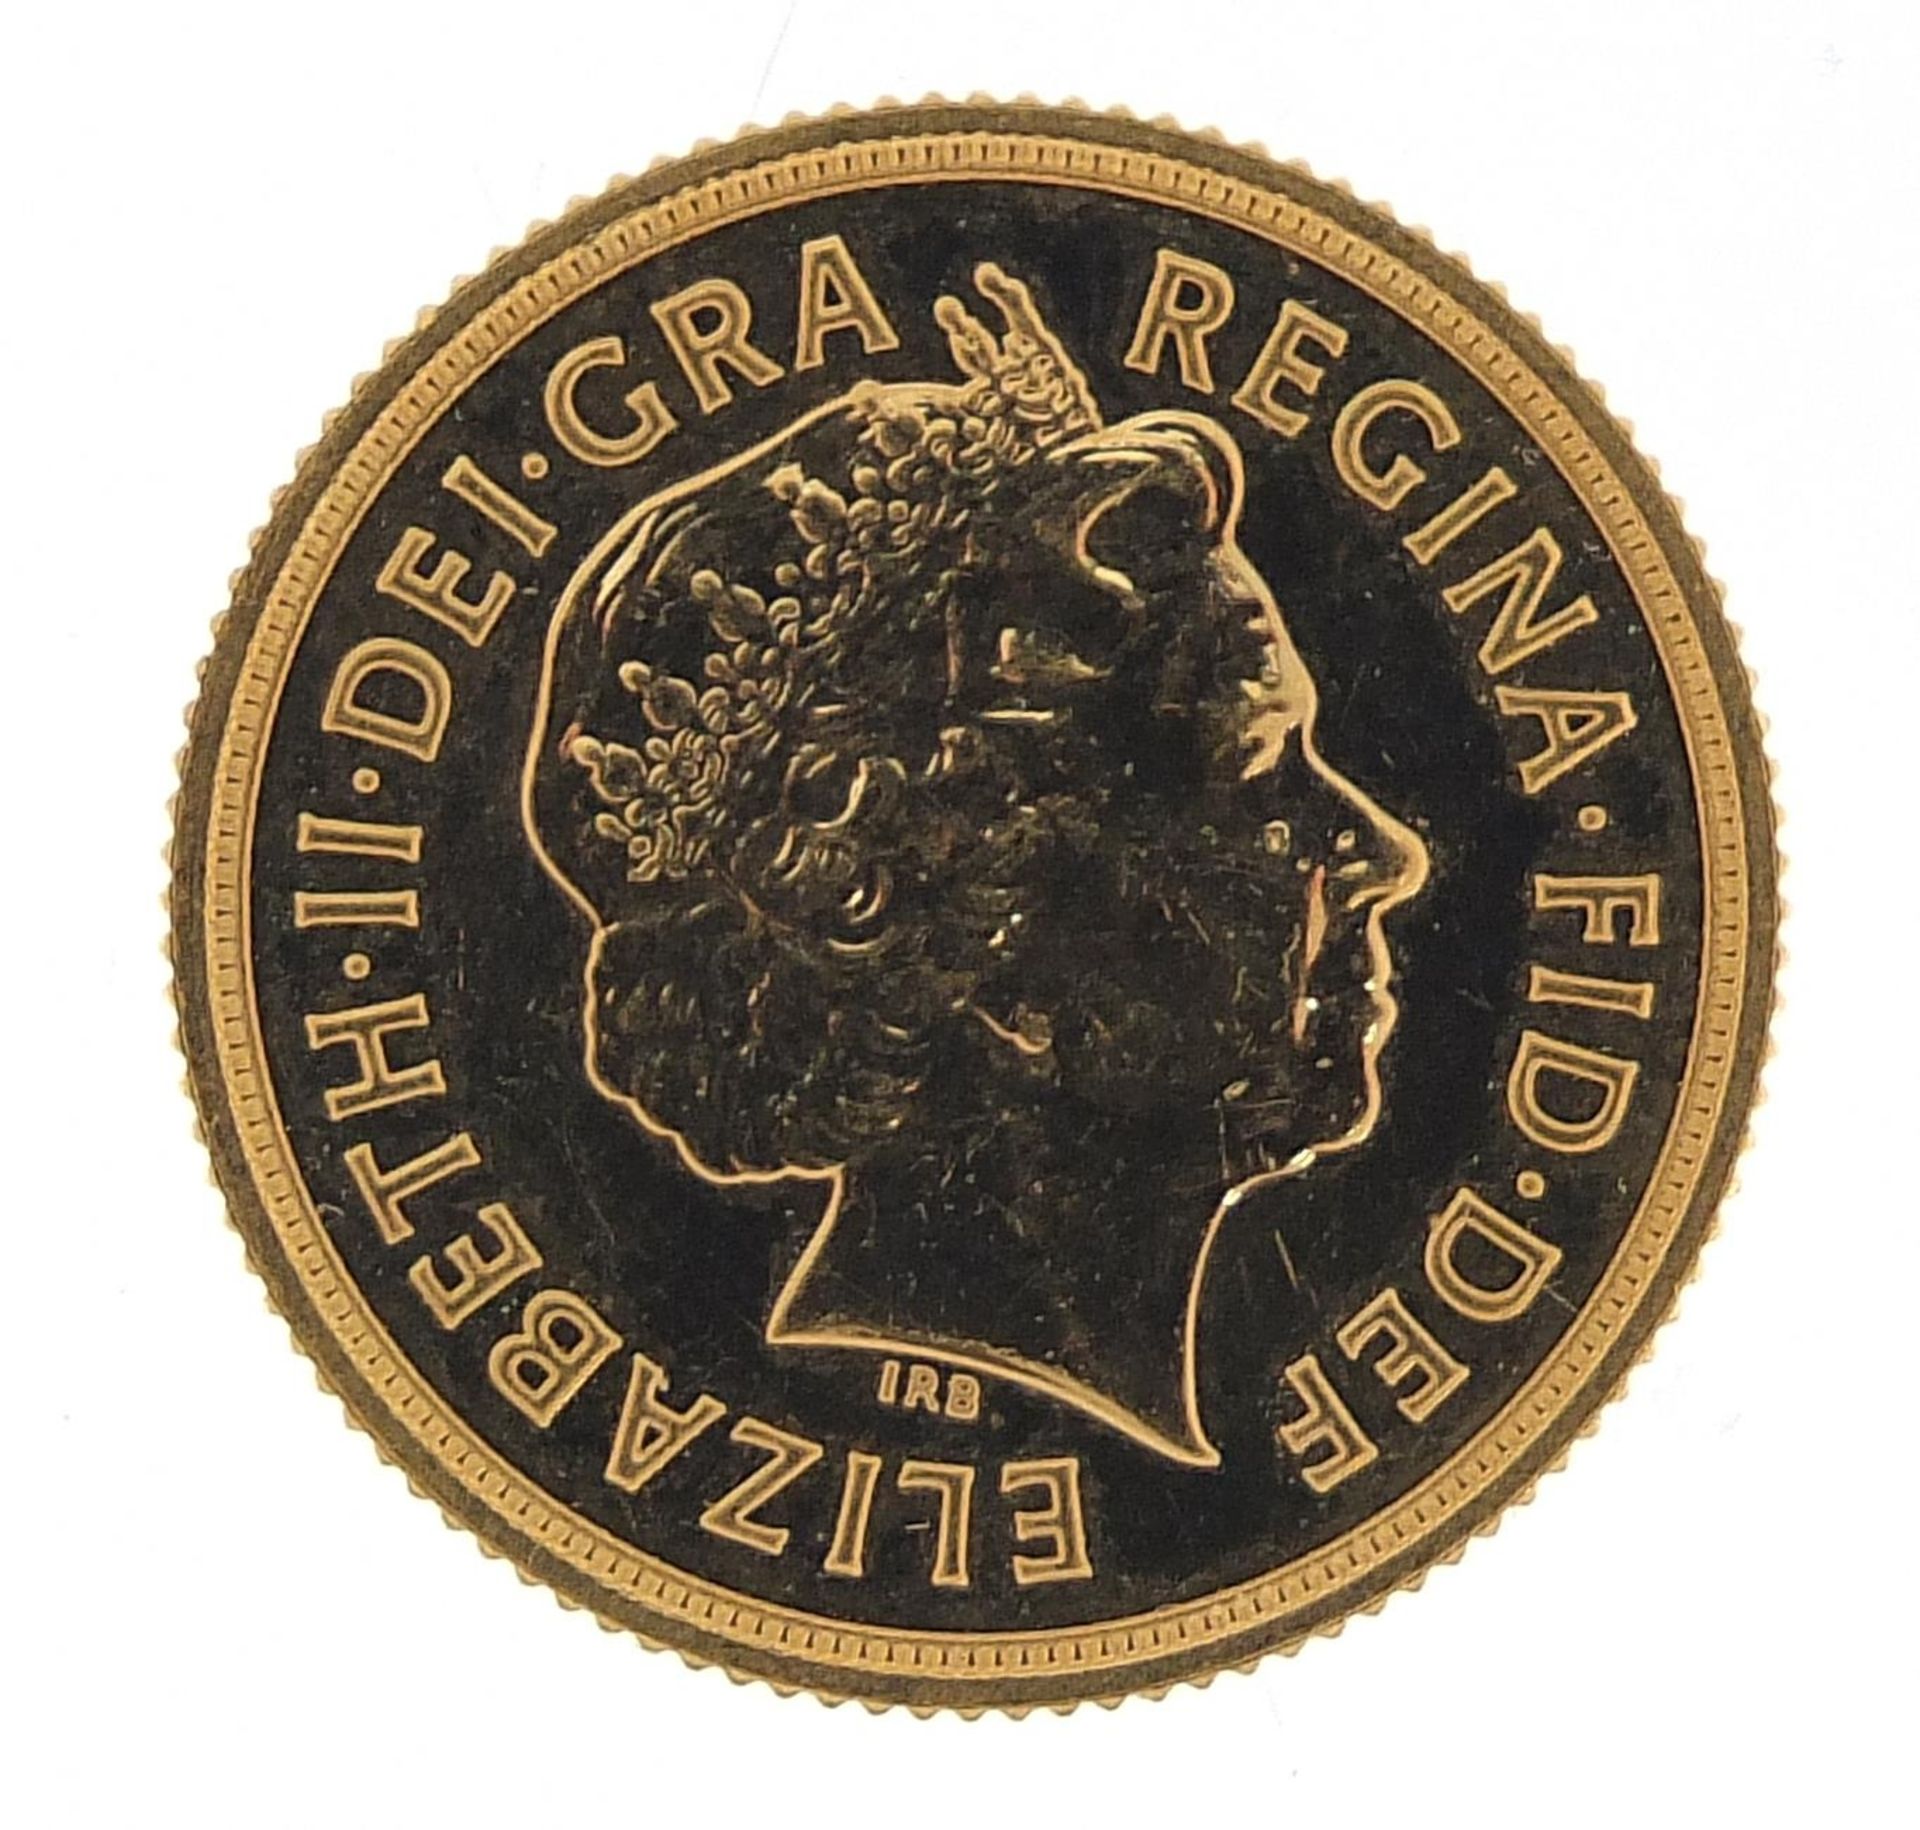 Elizabeth II 2013 gold sovereign - this lot is sold without buyer's premium - Image 2 of 3